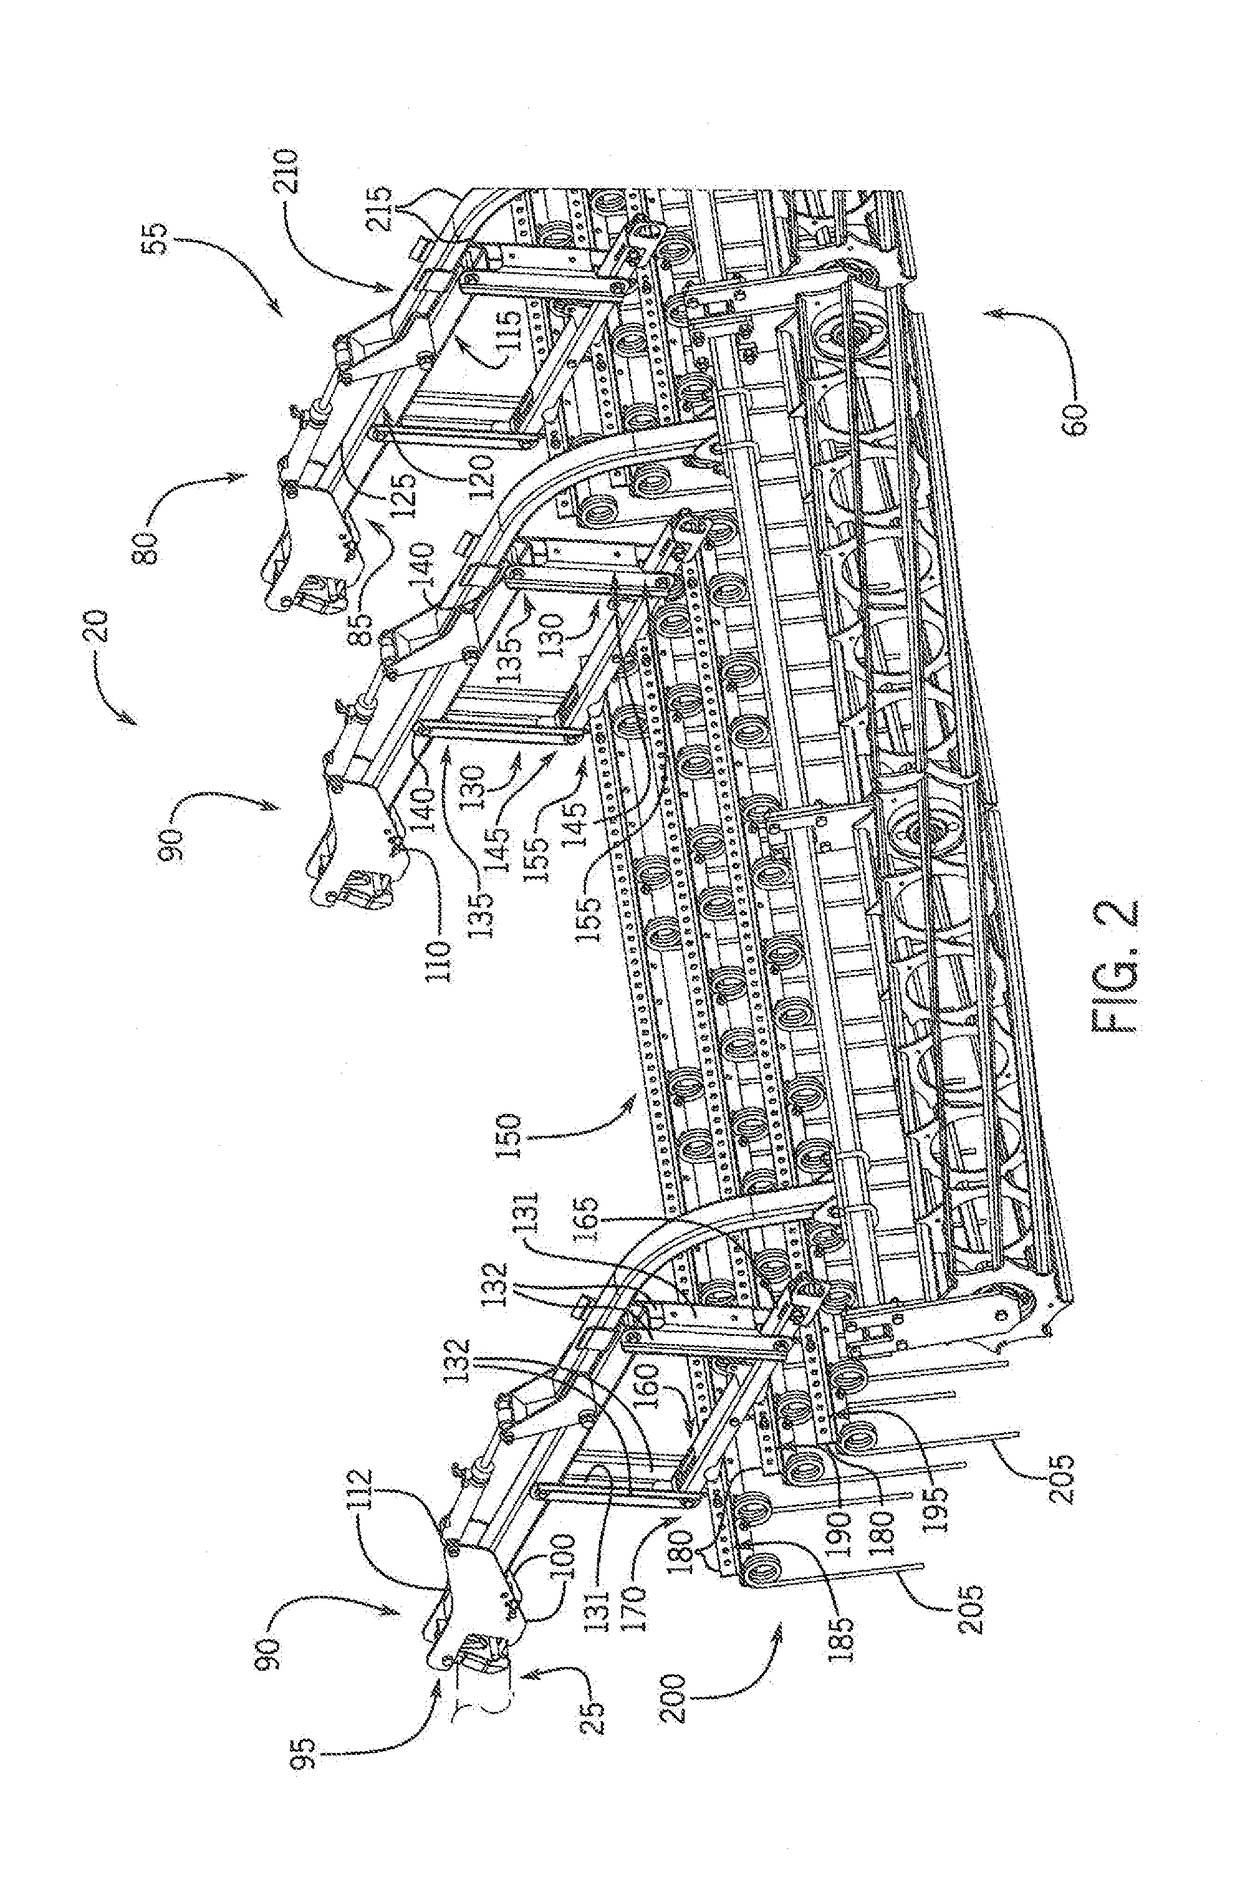 Agricultural Tillage Implement With Soil Finishing System Having Multiple Bar Harrow And Hydraulic Down Pressure For Finishing Tool